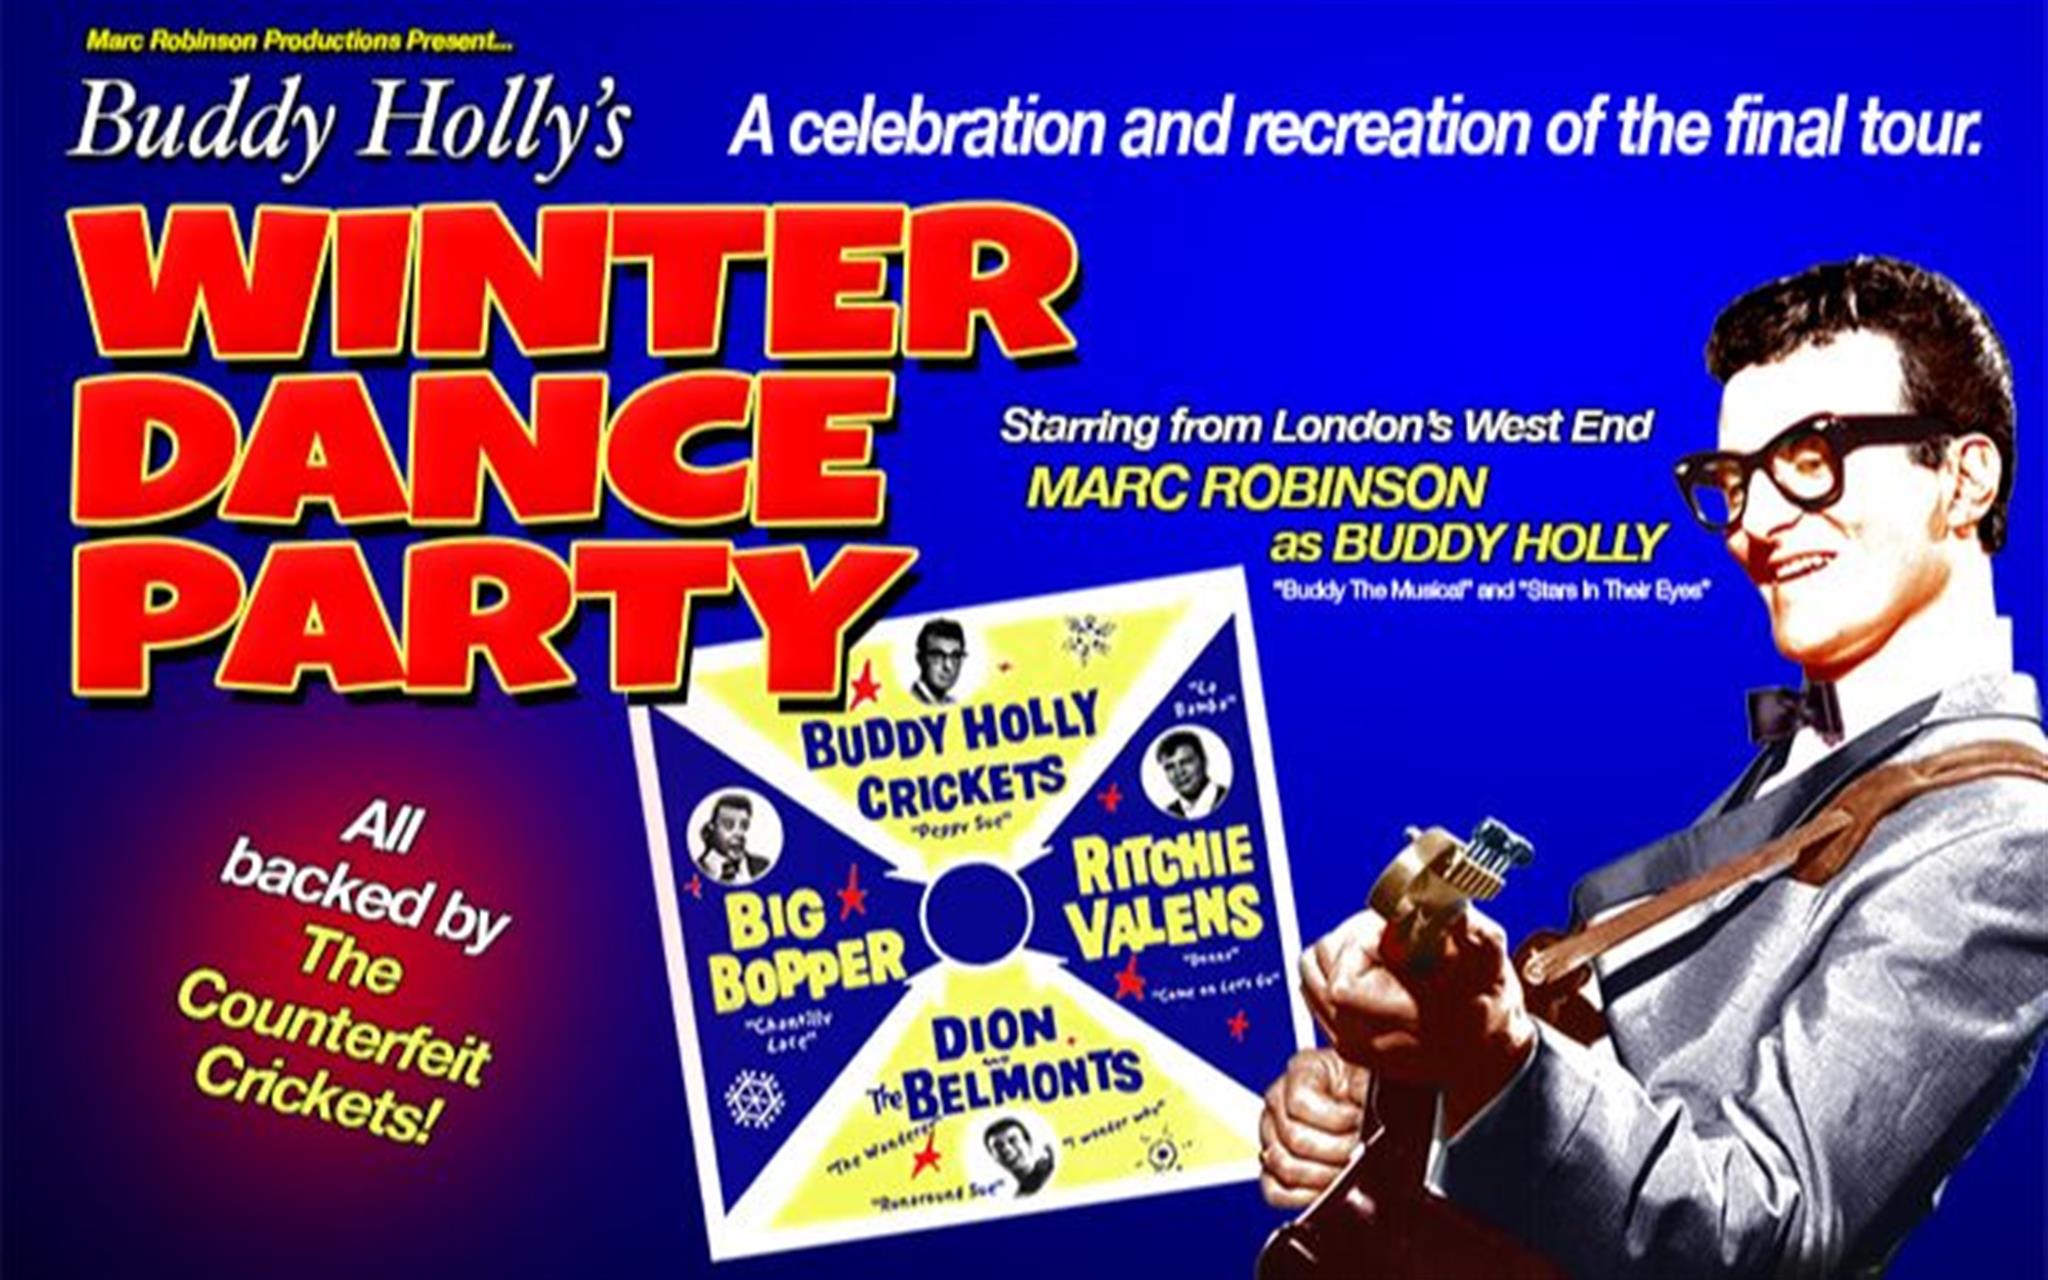 Buddy Holly Winter Dance Party image